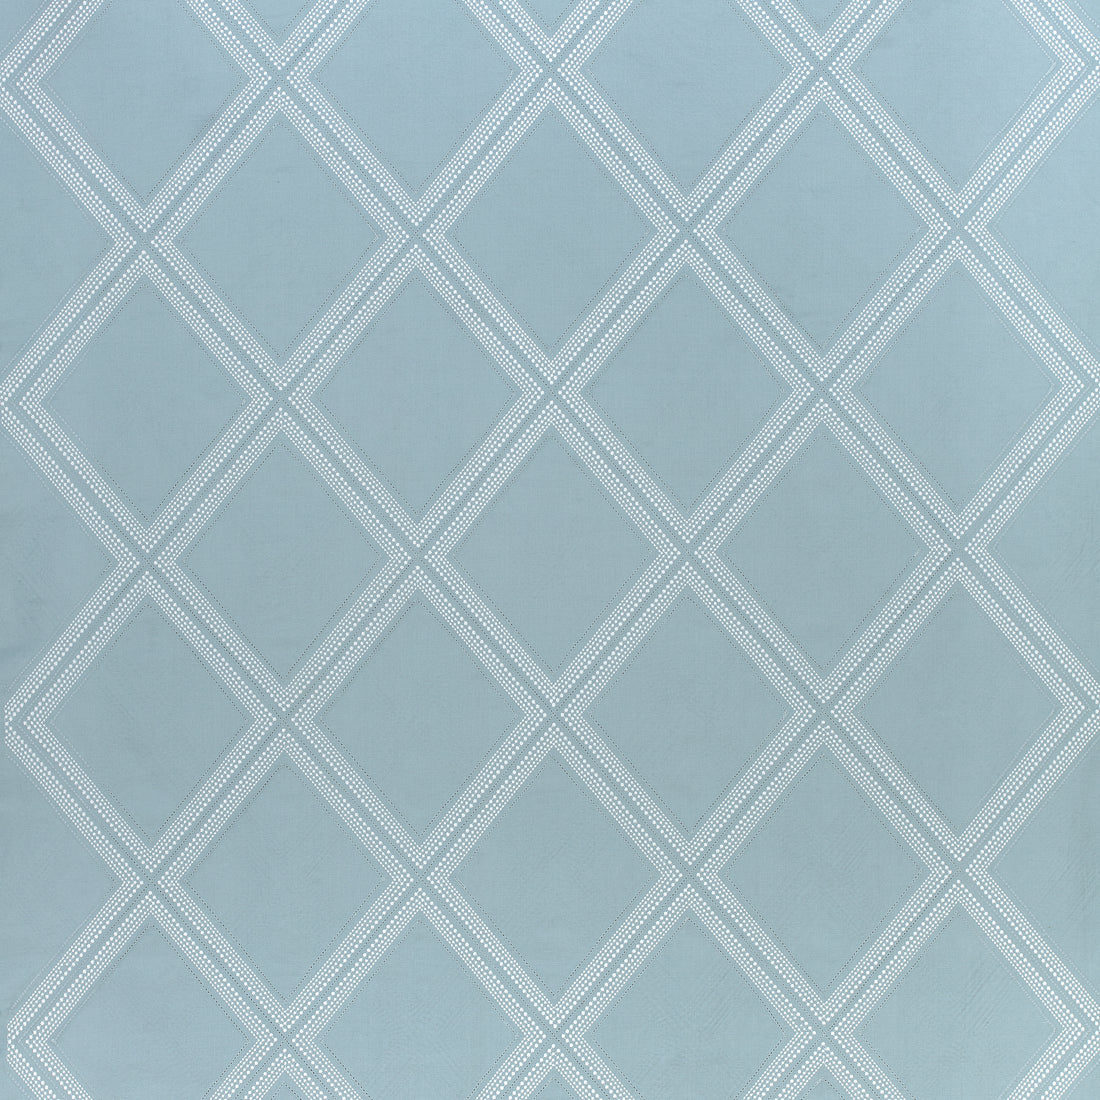 Diamond Head Embroidery fabric in aqua color - pattern number W785014 - by Thibaut in the Greenwood collection